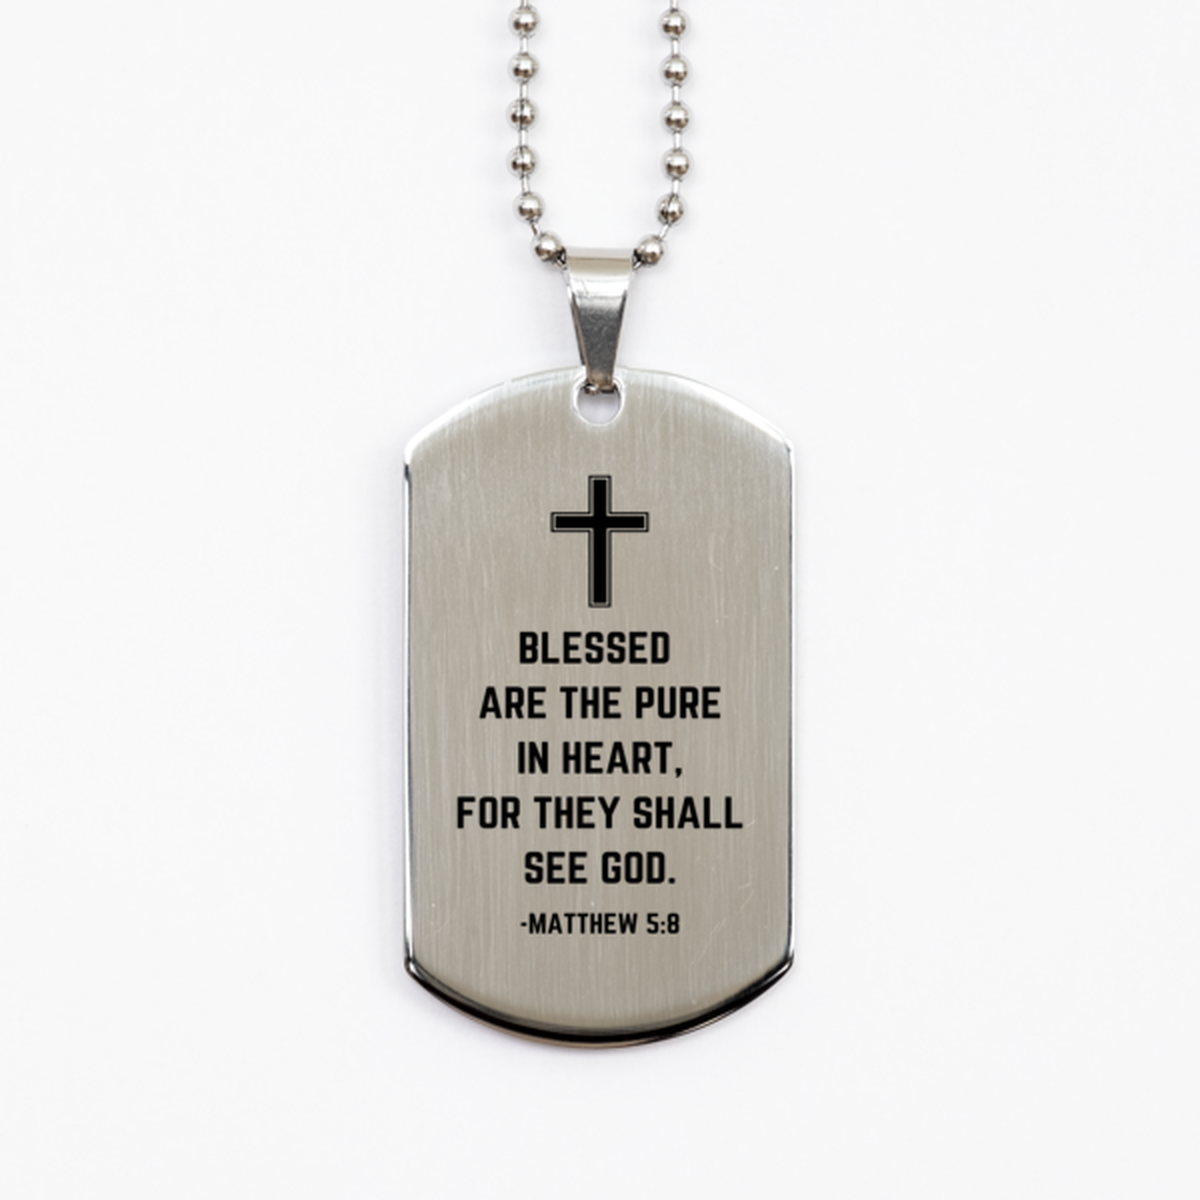 Baptism Gifts For Teenage Boys Girls, Christian Bible Verse Silver Dog Tag, Blessed are the pure in heart, Confirmation Gifts, Bible Verse Necklace for Son, Godson, Grandson, Nephew